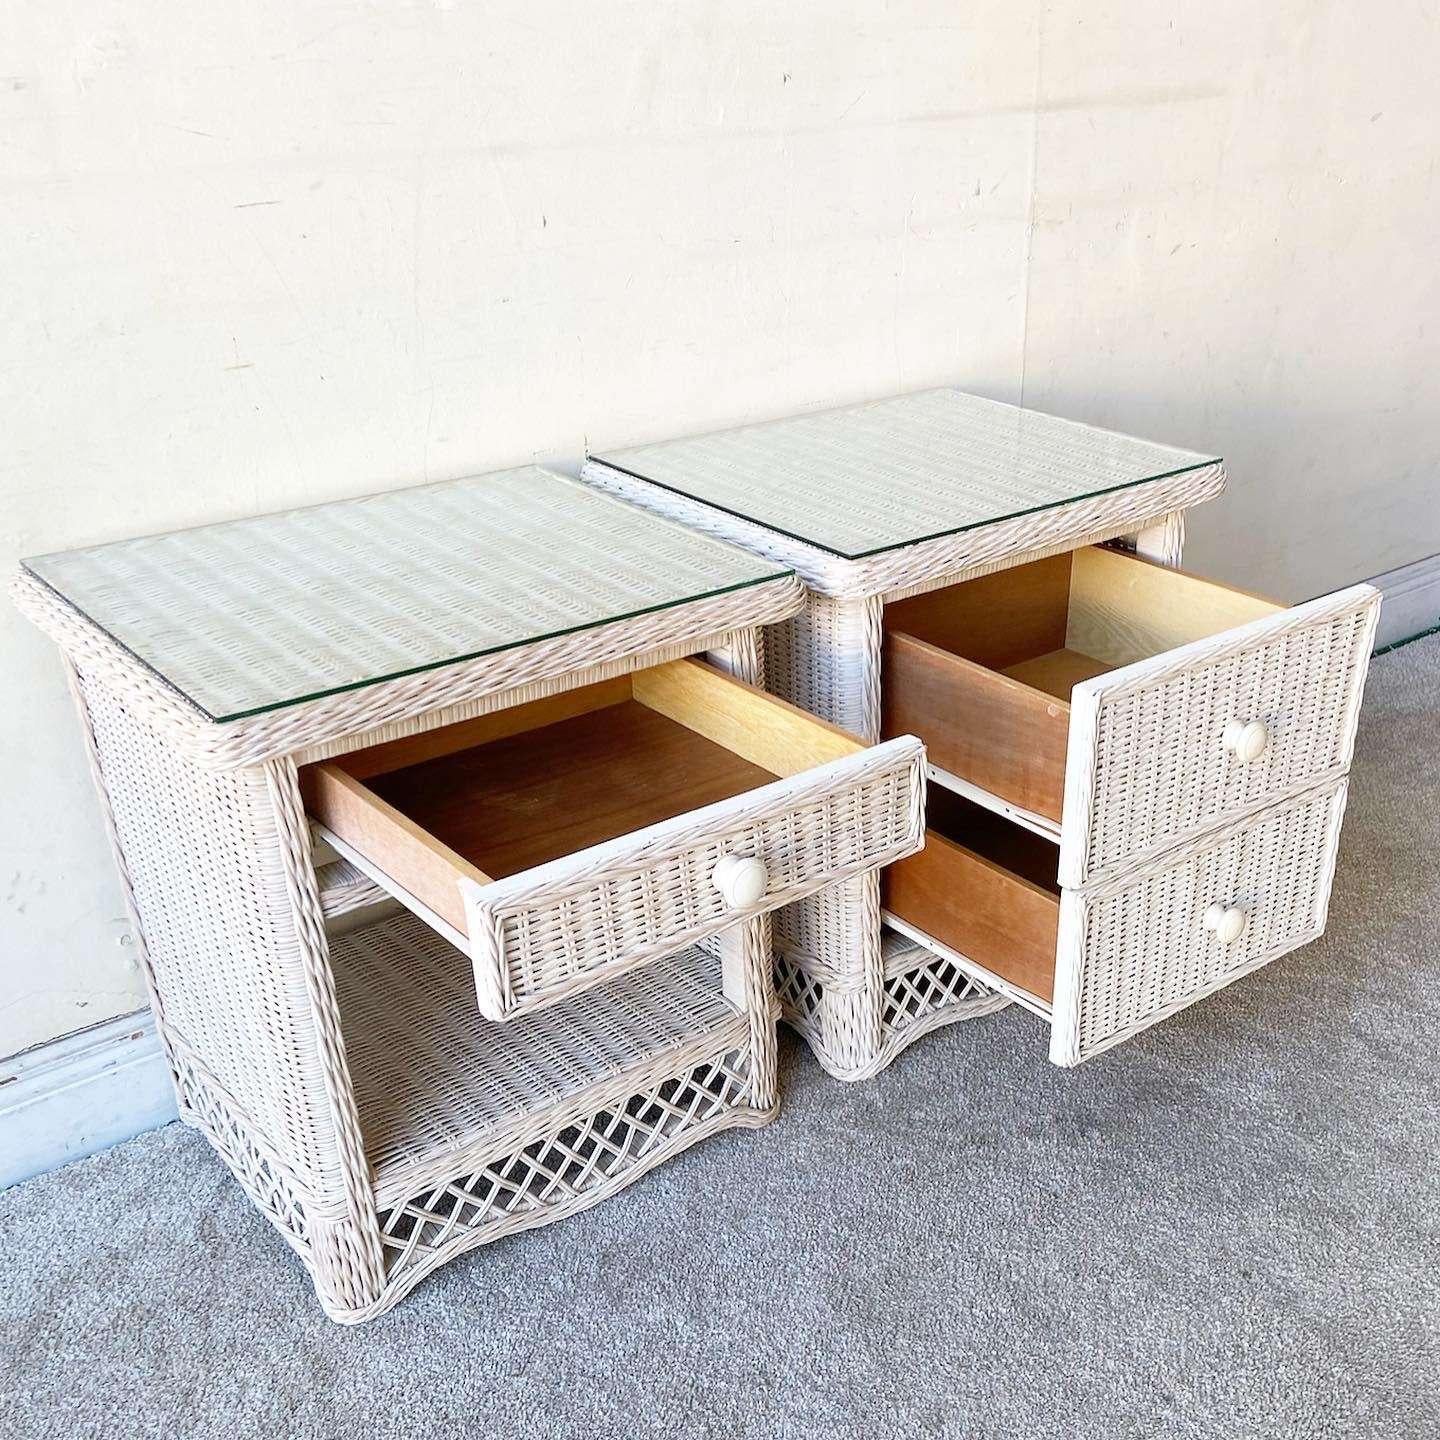 1990s Boho Chic White Wicker Glass Top Nightstands - Set of 2 In Good Condition For Sale In Delray Beach, FL